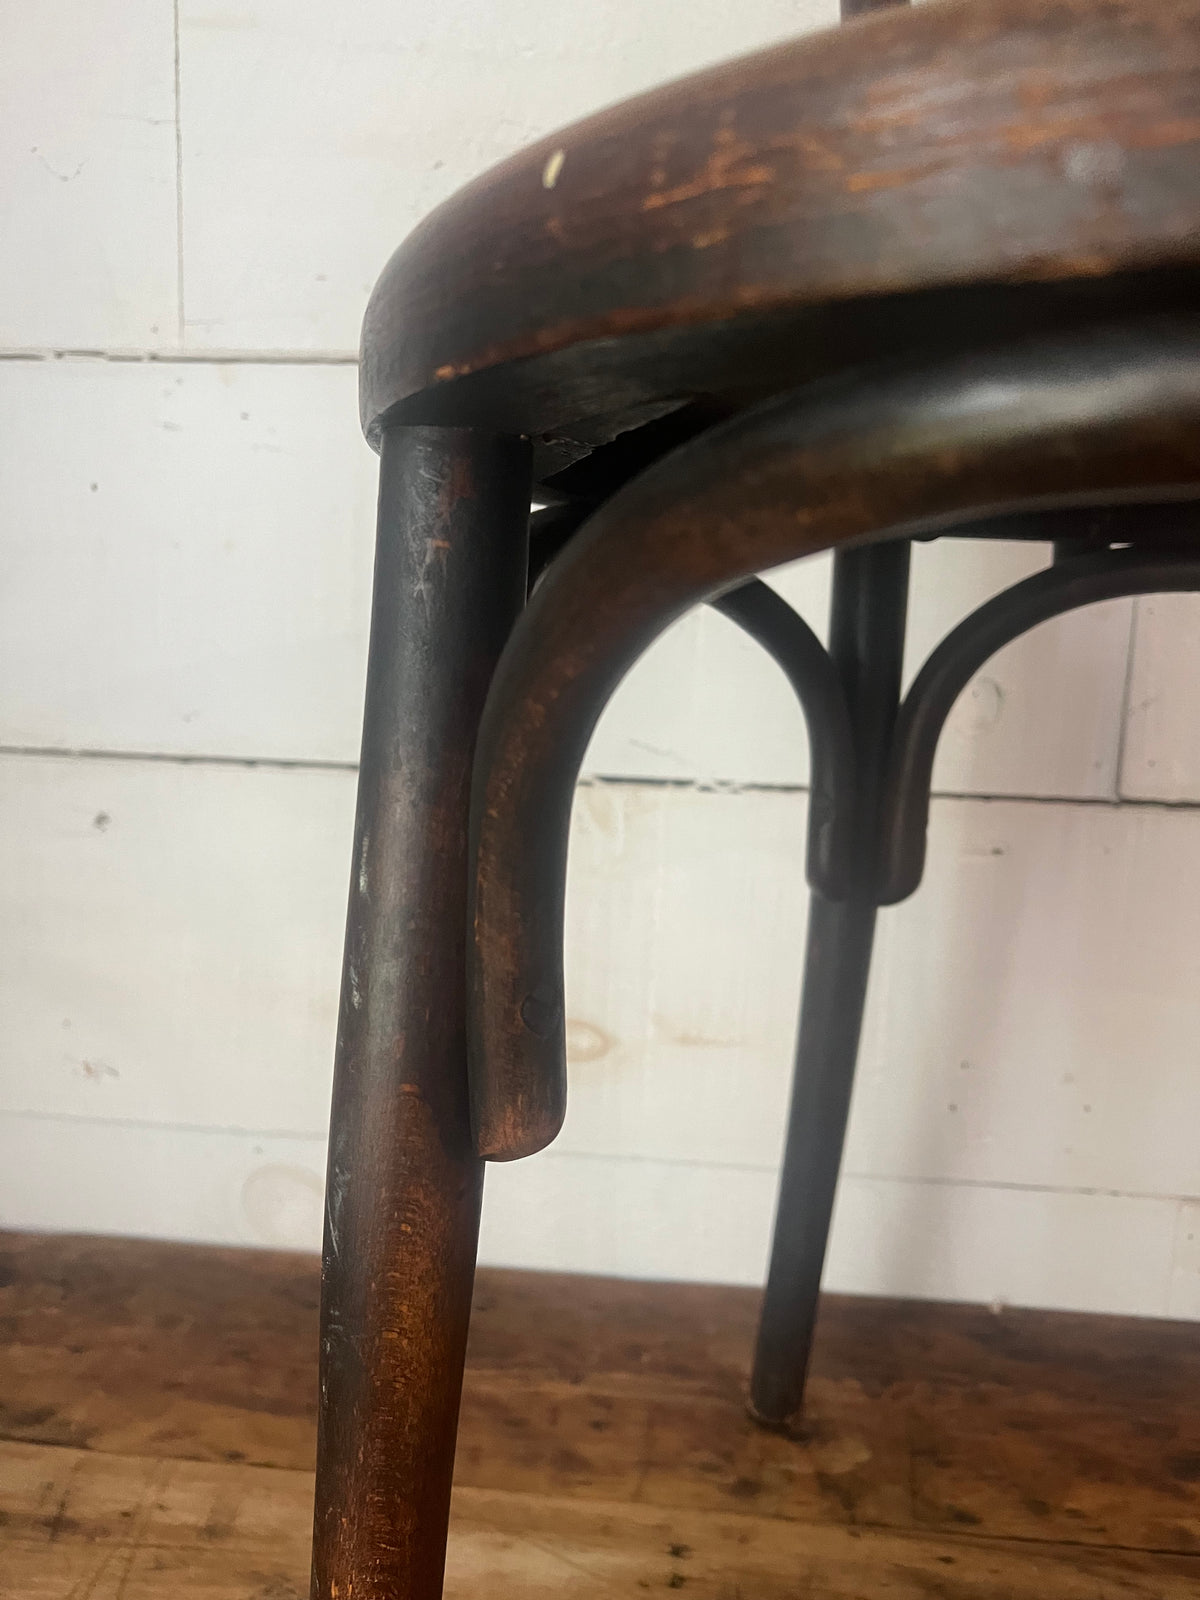 Vintage Thonet Style Bentwood Chair - Wood Grain